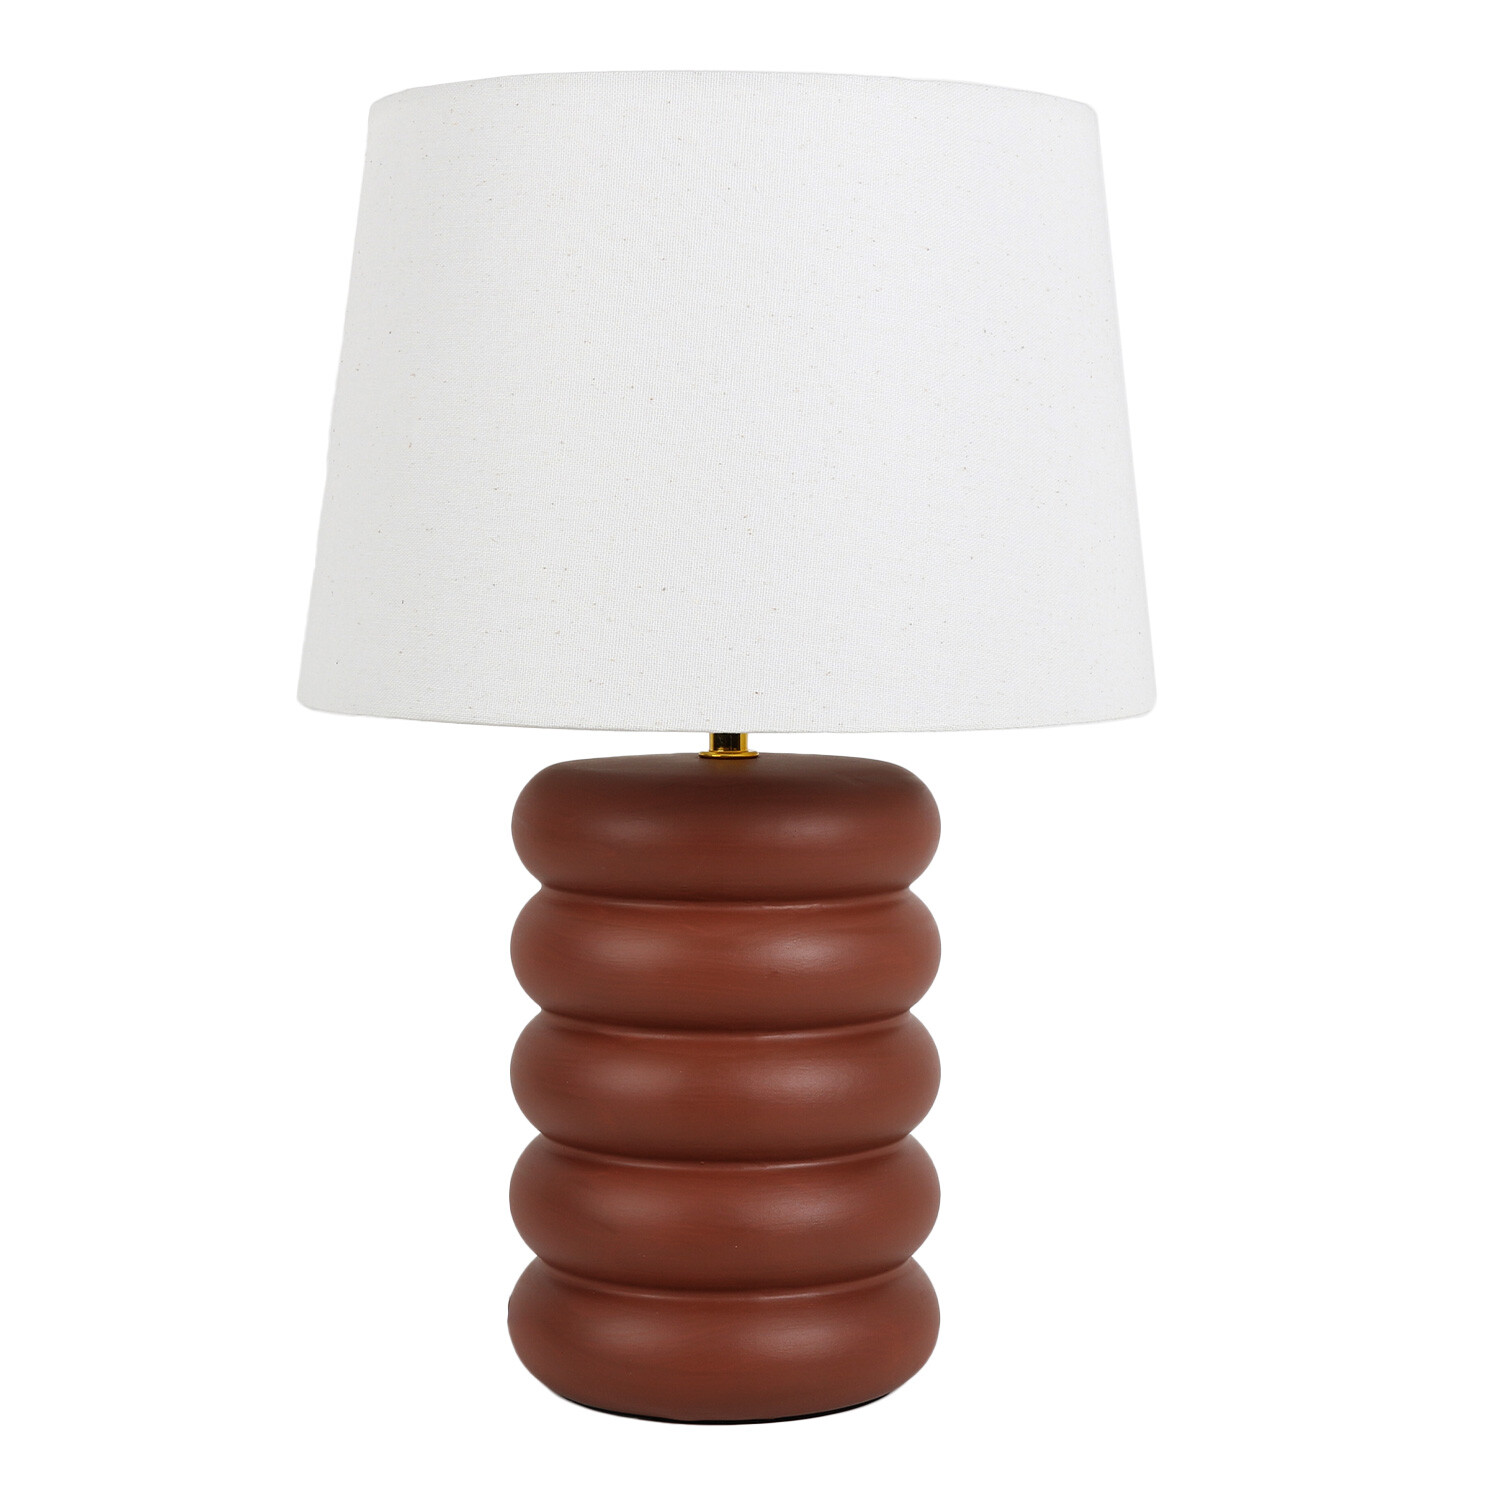 Single Isobel Cylindrical Table Lamp in Assorted styles Image 1